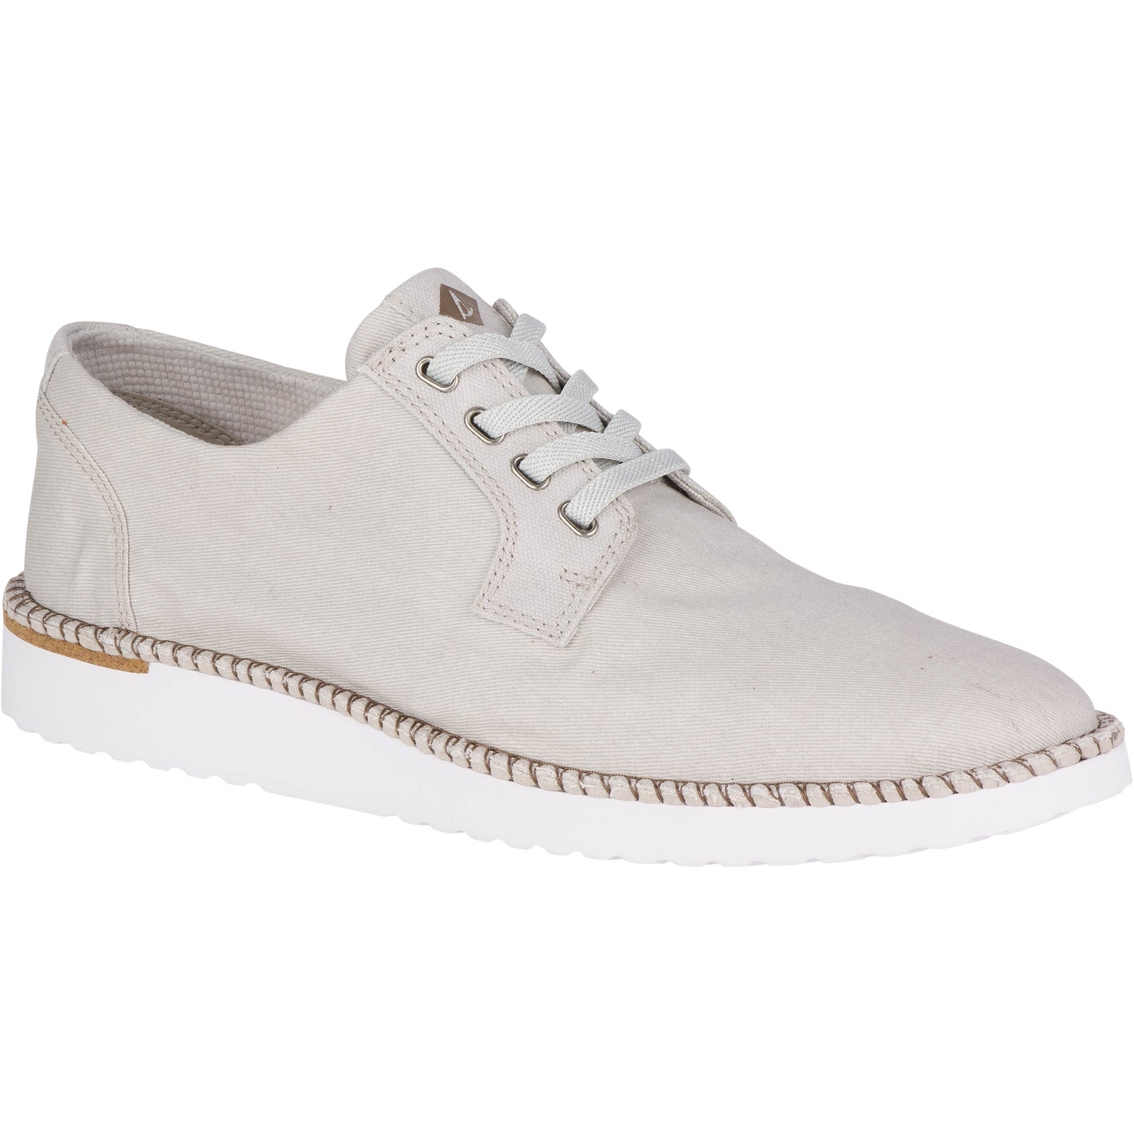 sperry canvas sneakers mens